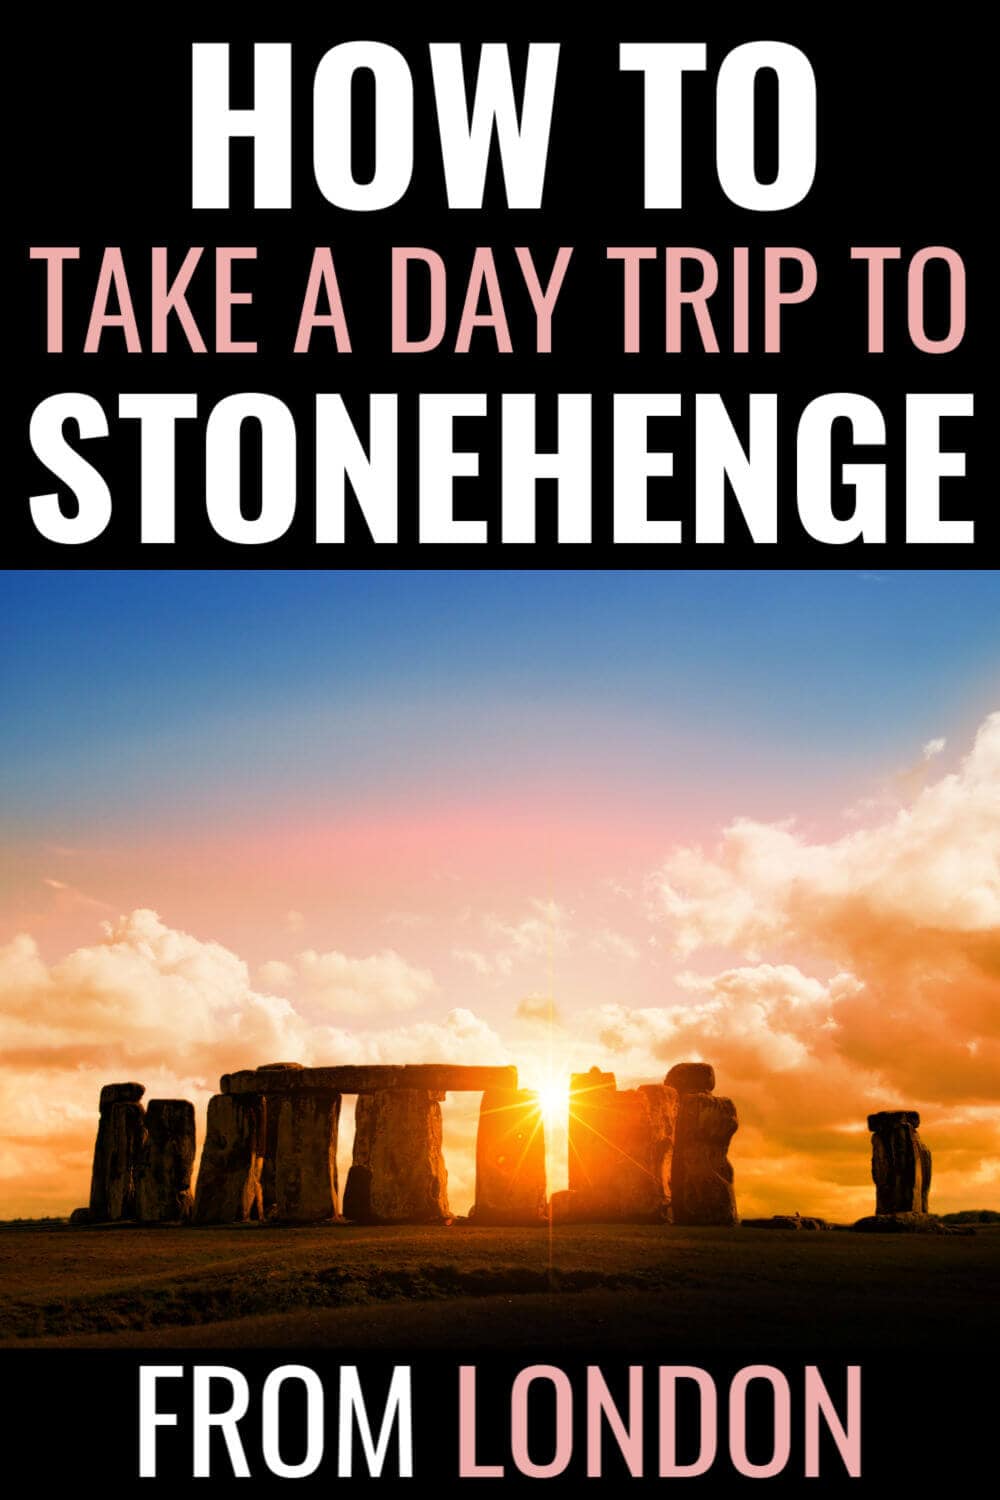 Pinterest Pin Day Trip To Stonehenge from London